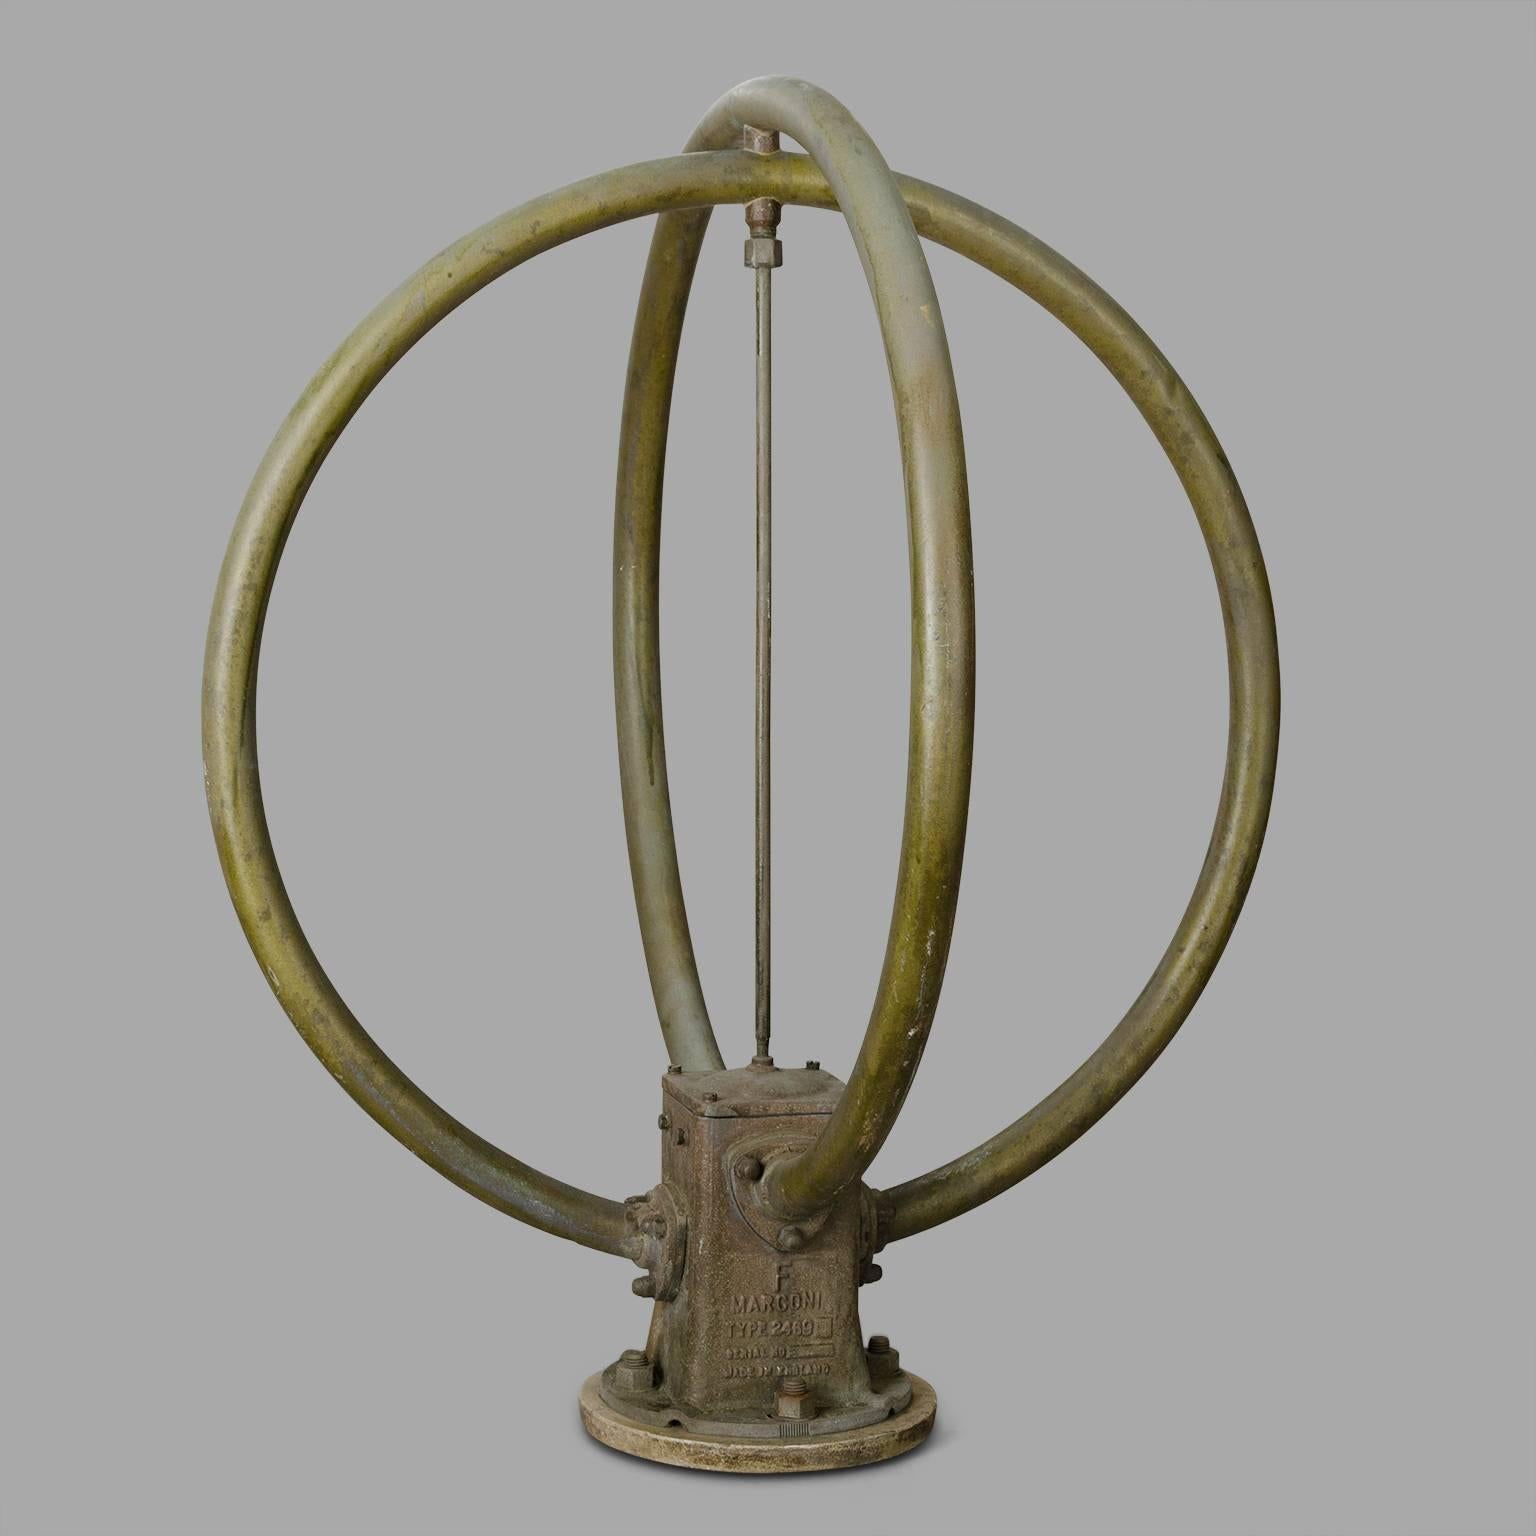 Gonio bronze antenna. Brand Marconi. England second half of the 20th century. Two inscriptions: "F. MARCONI Type 2469 B - Made in England" and "DO NOT PAINT INSULATION."